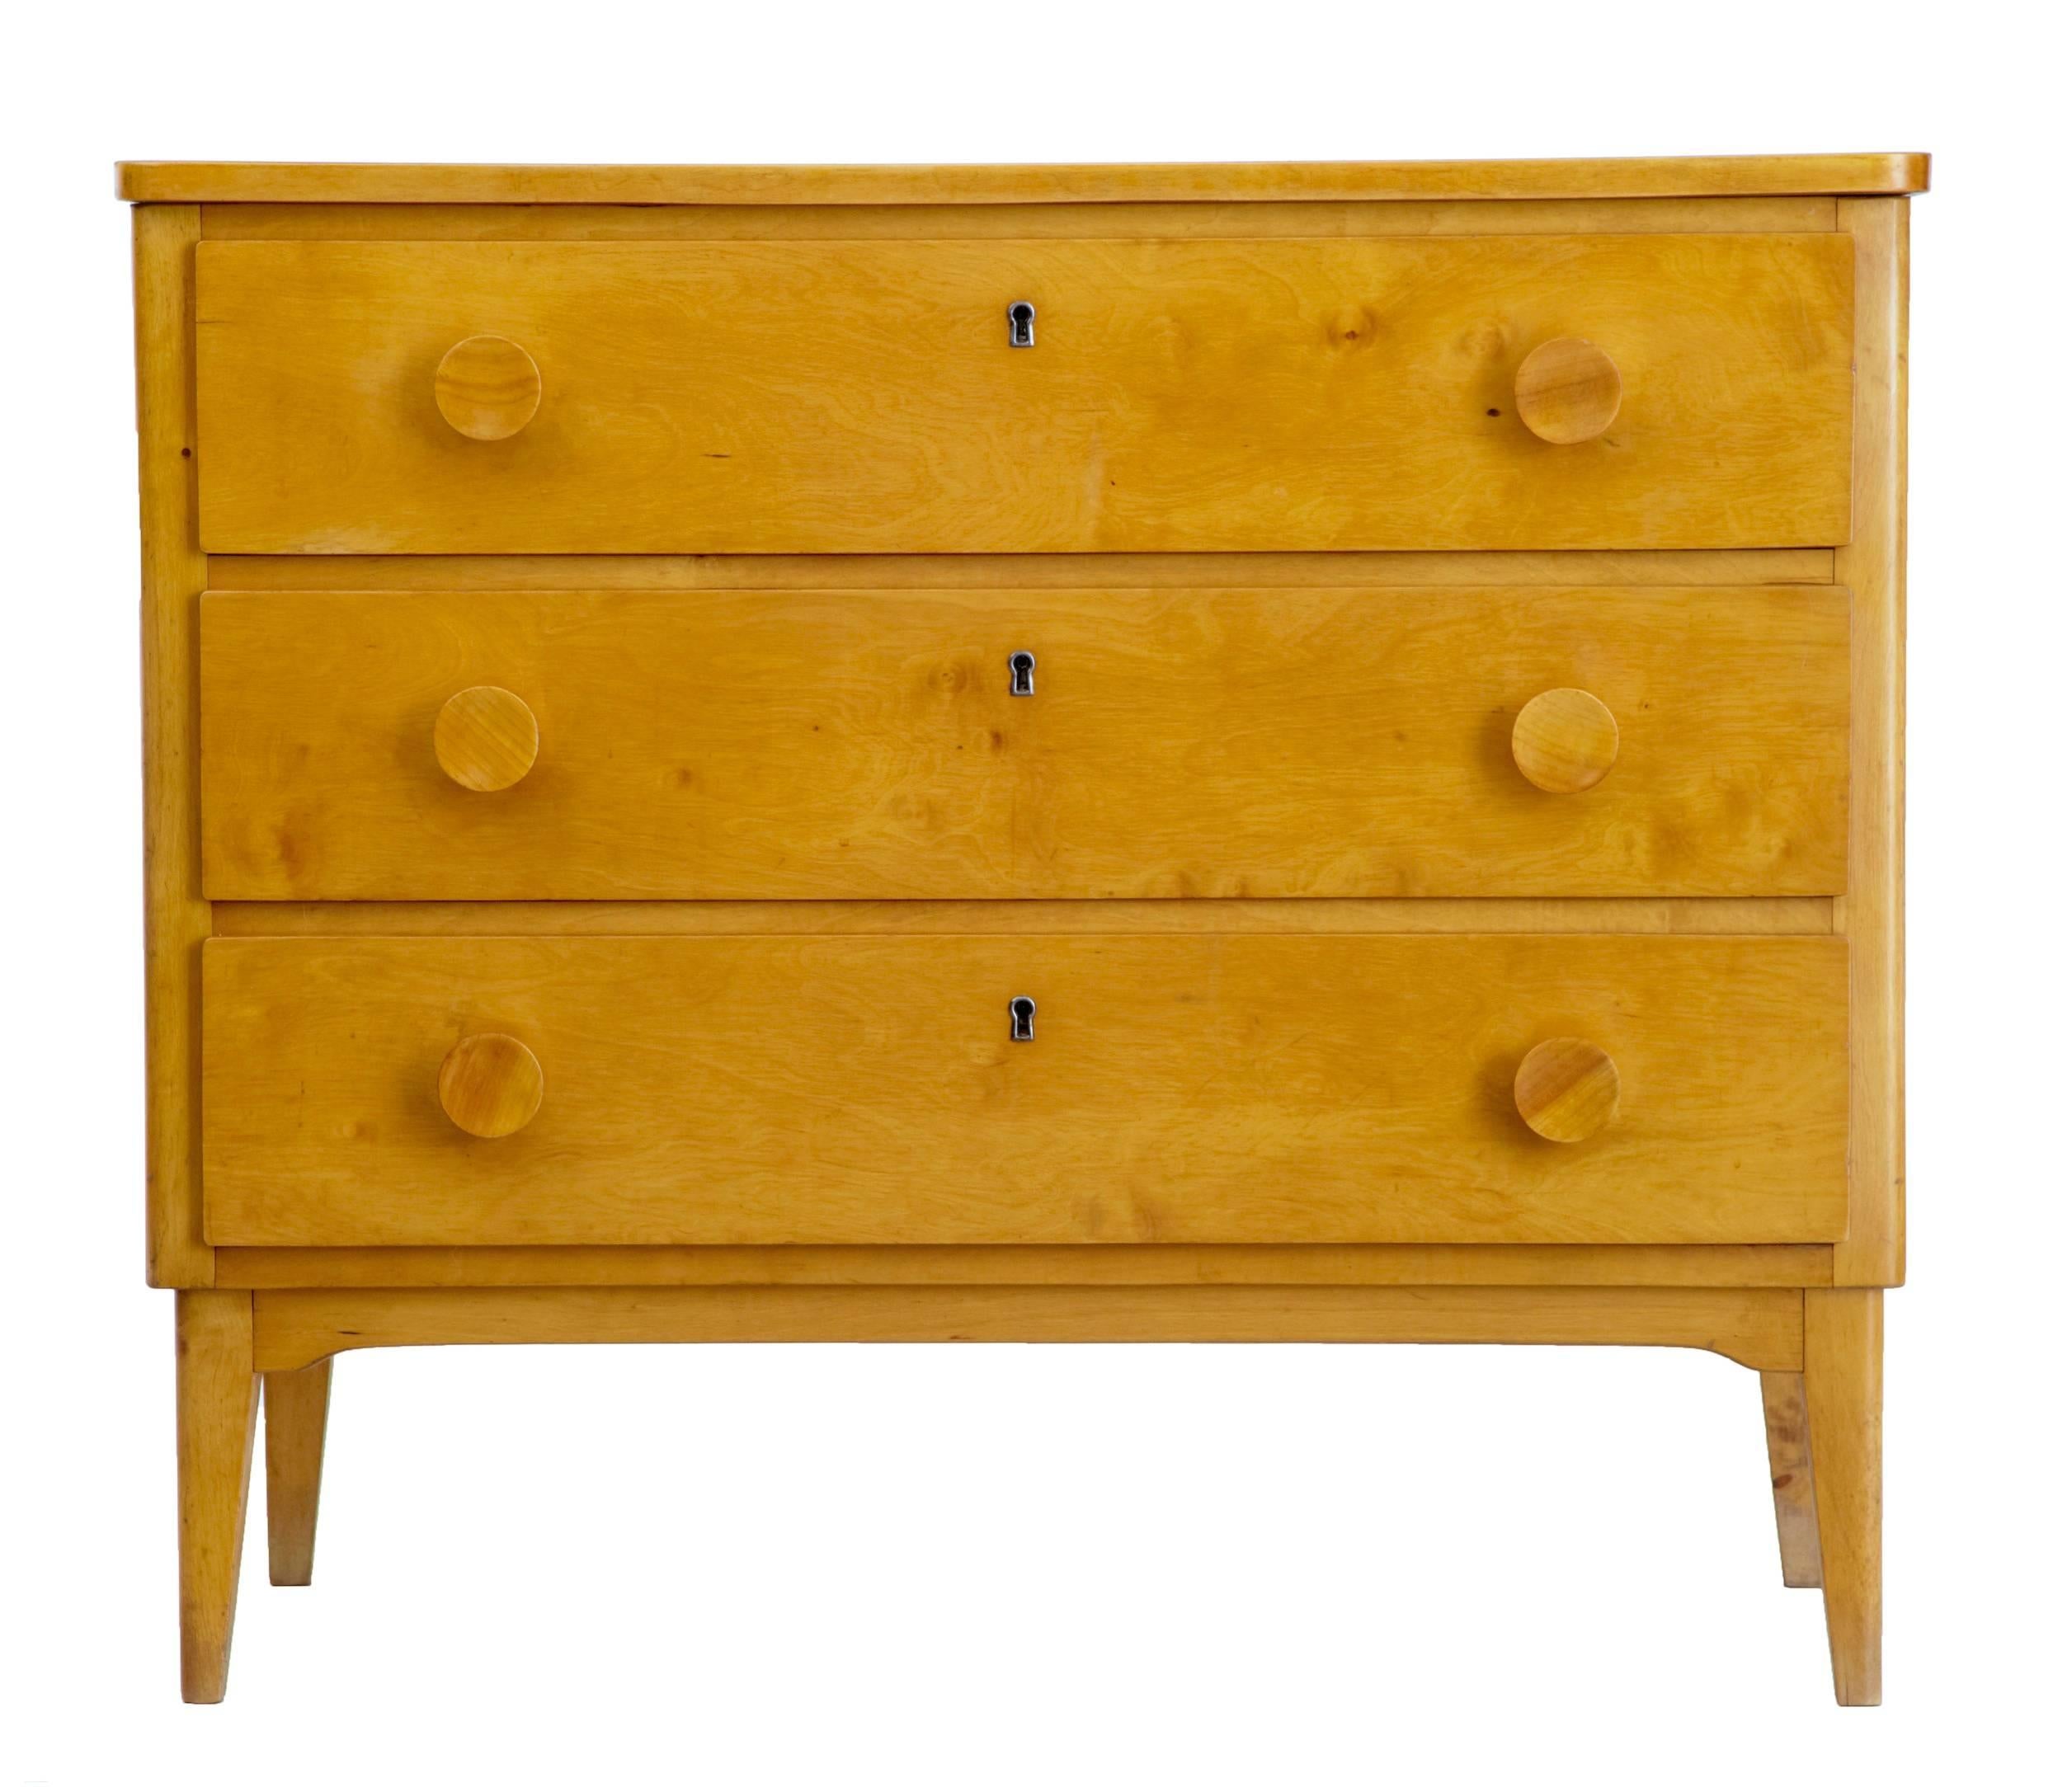 Golden birch chest of drawers, circa 1960.
Three drawers with matching handles.
Art Deco in taste.
Standing on tapering legs.

No key.

Measures: Height 28 1/4